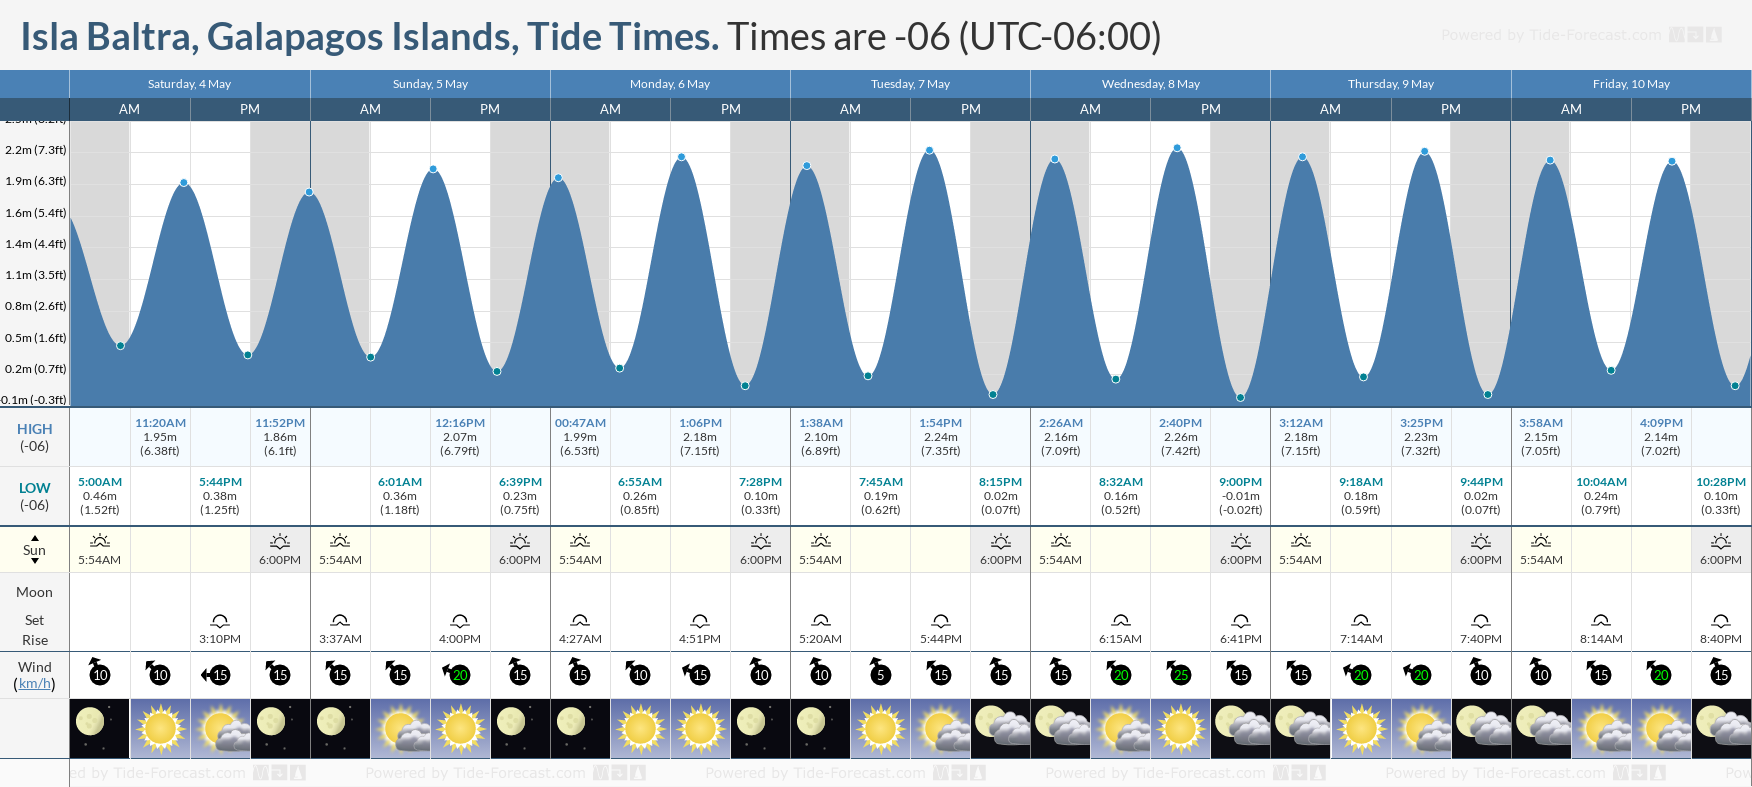 Isla Baltra, Galapagos Islands Tide Chart including high and low tide tide times for the next 7 days